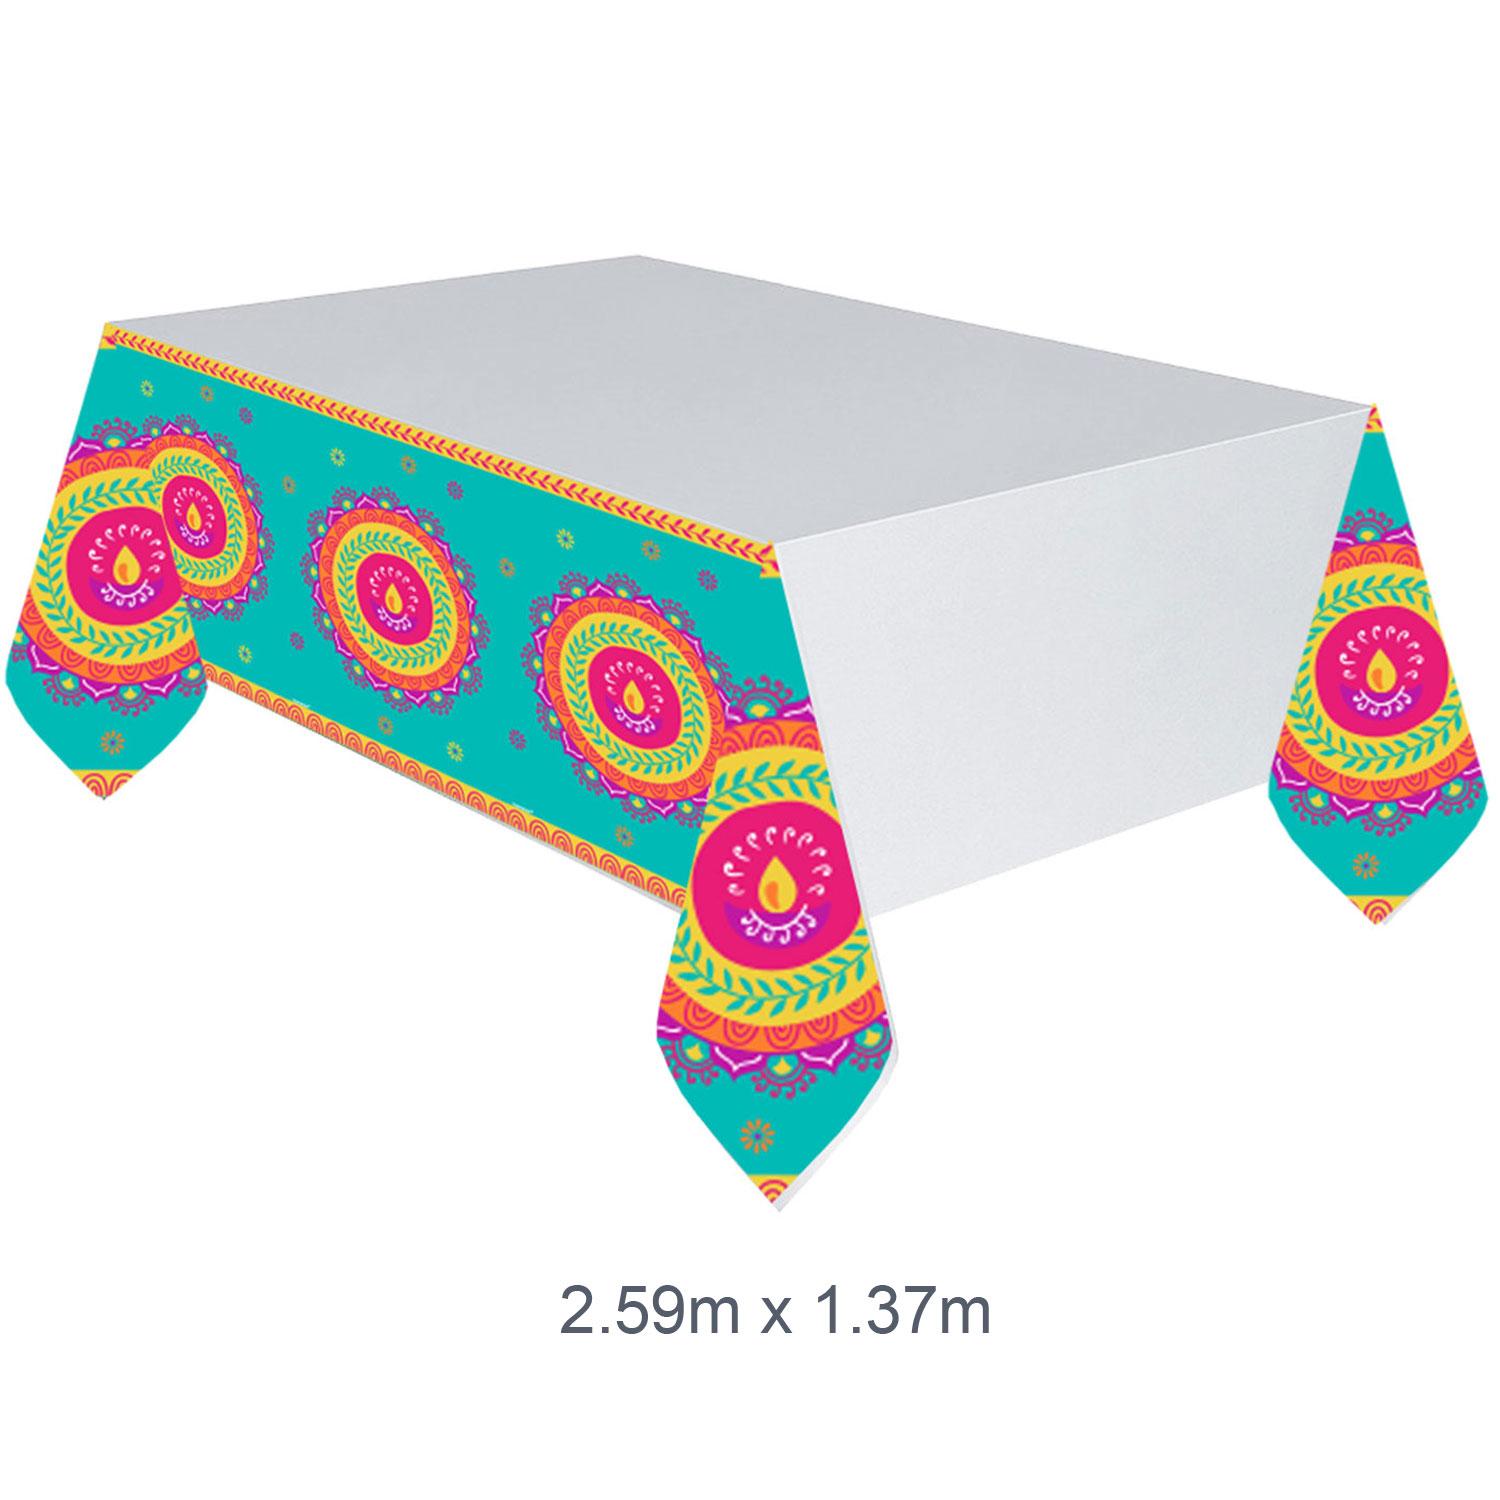 Diwali Celebrations Plastic Tablecovers 1.37m x 2.59m by Amscan 572413 available here at Karnival Costumes online party shop